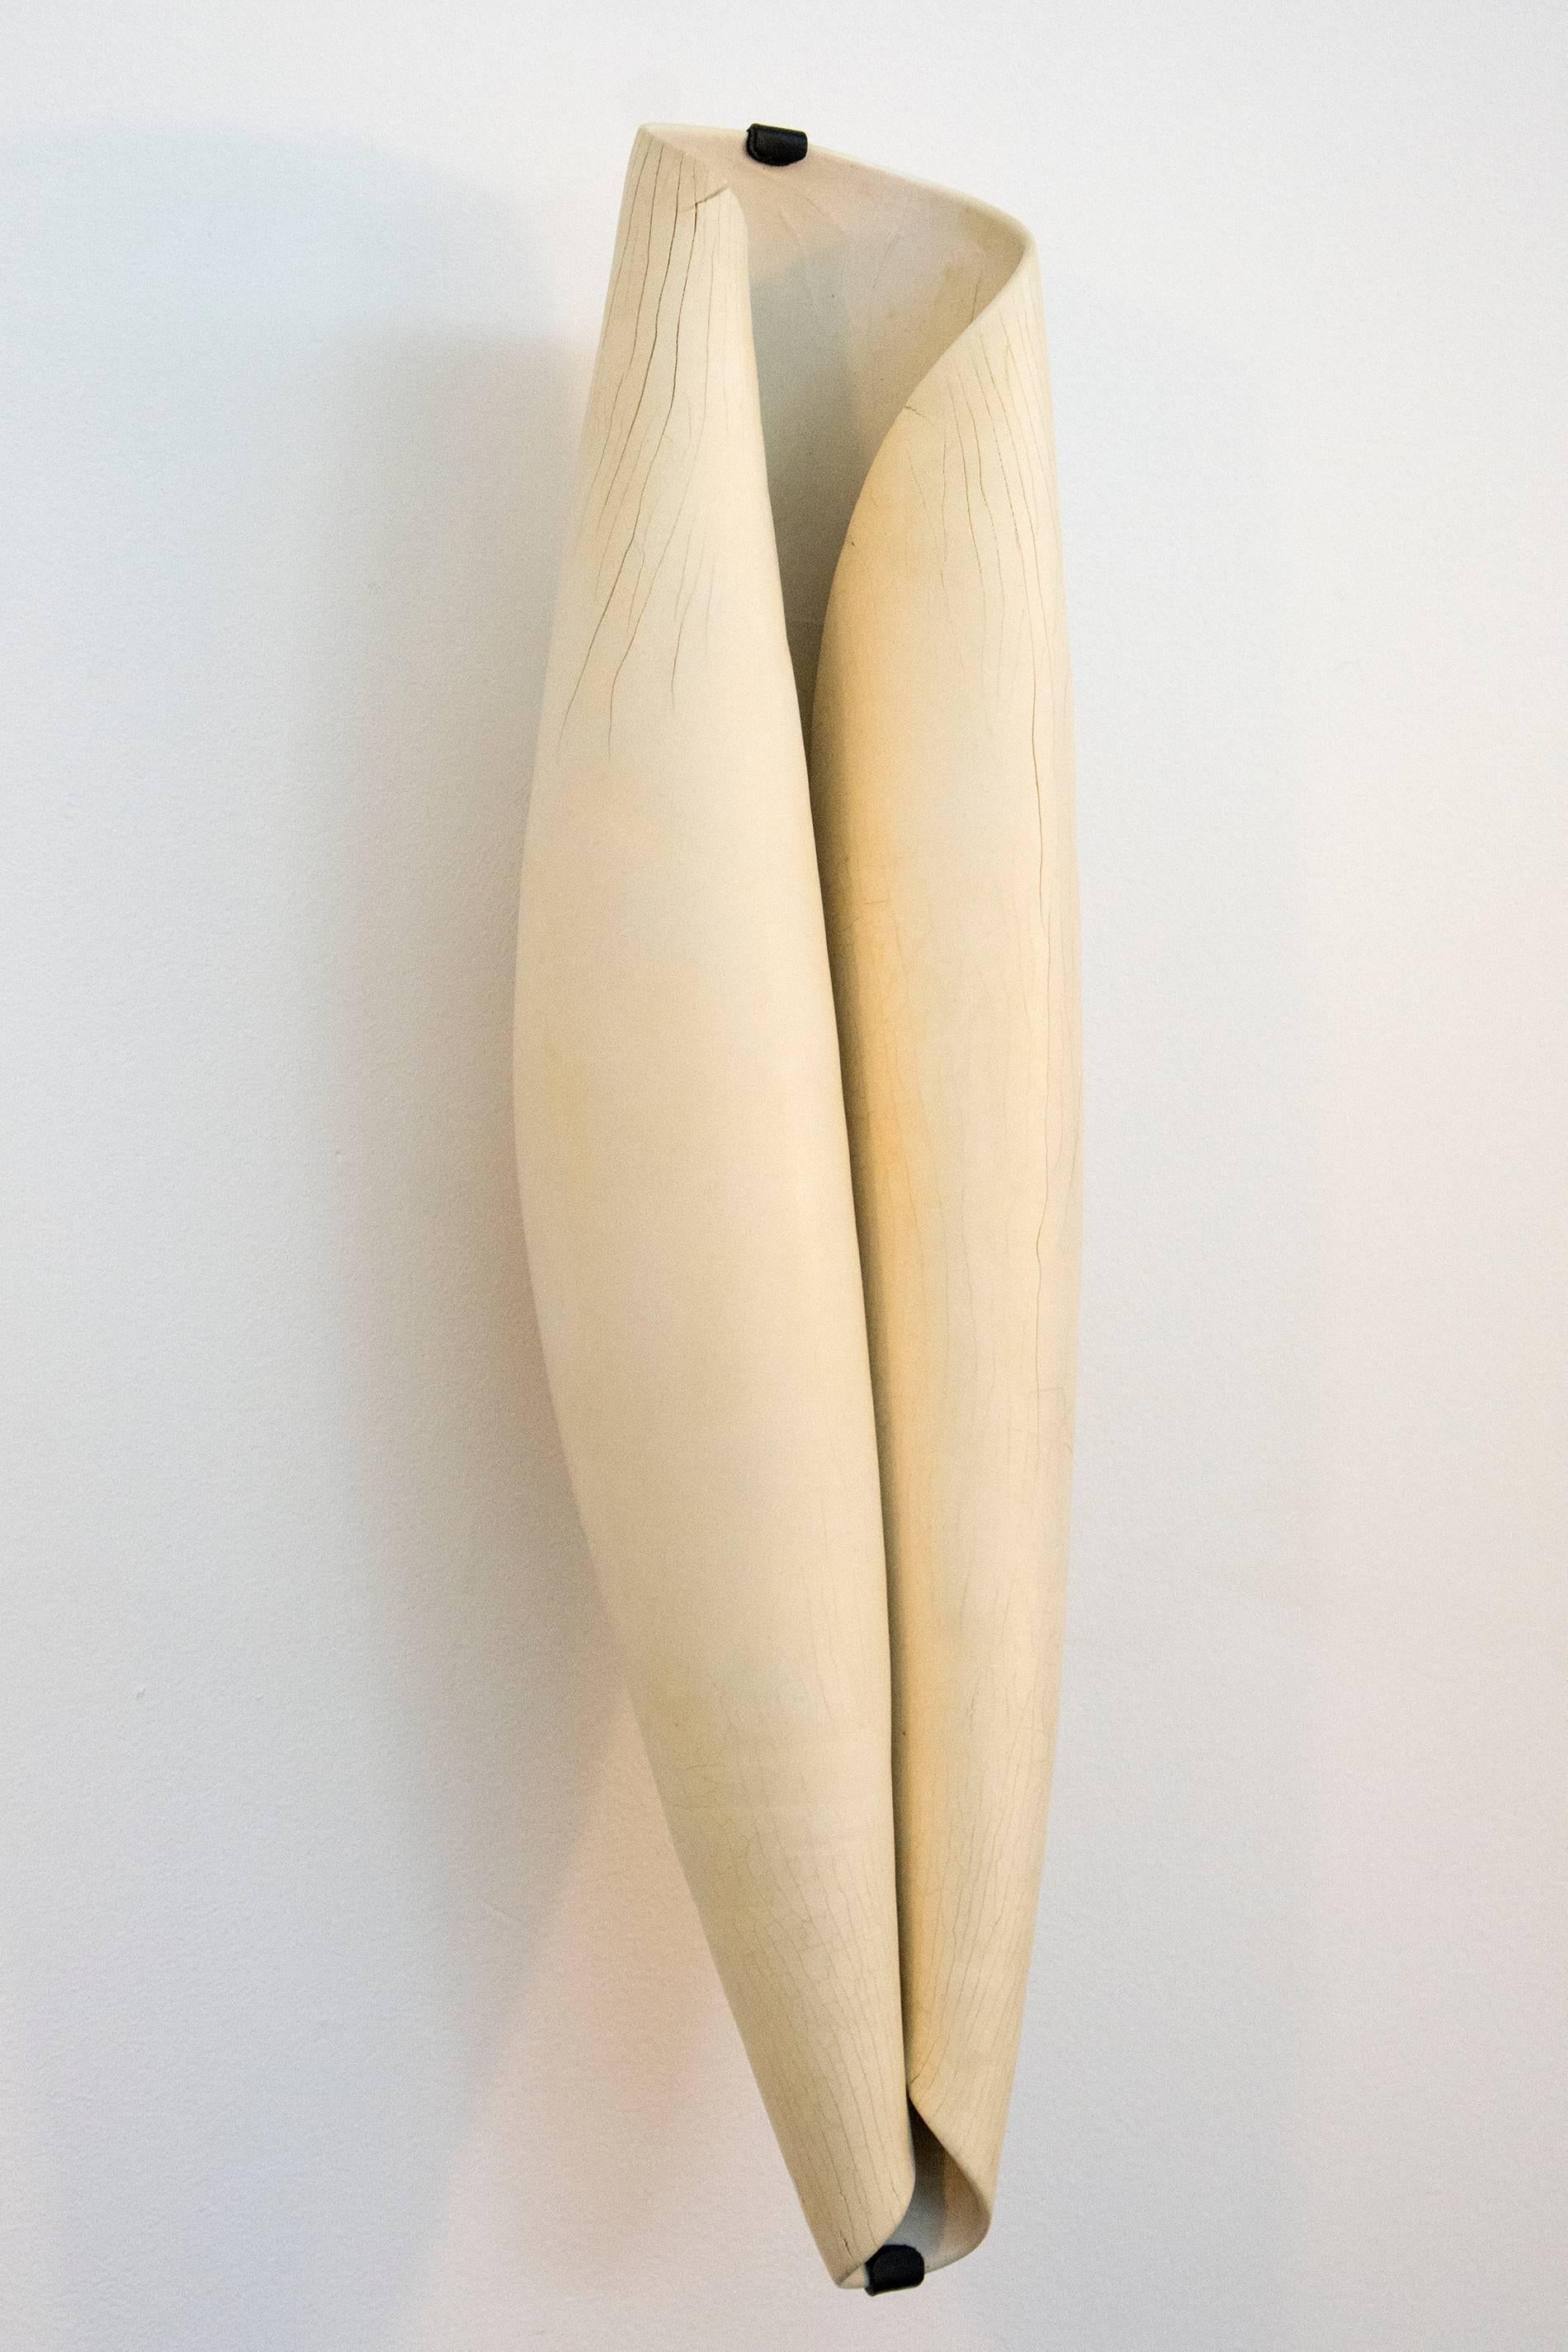 Paula Murray Abstract Sculpture - State of Being V